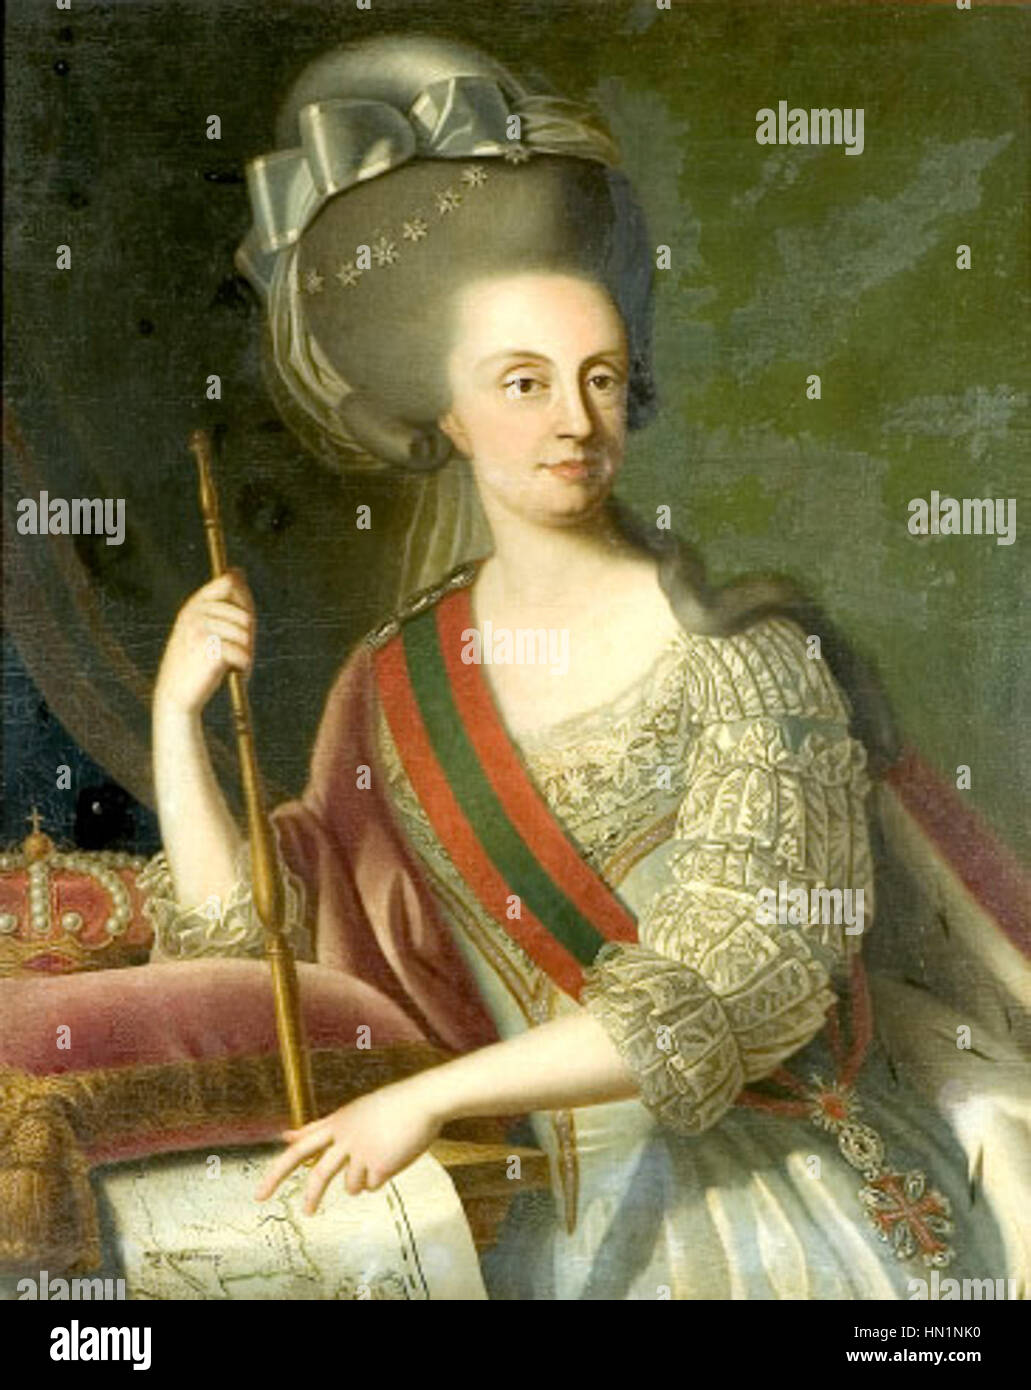 Maria I, queen of Portugal Stock Photo